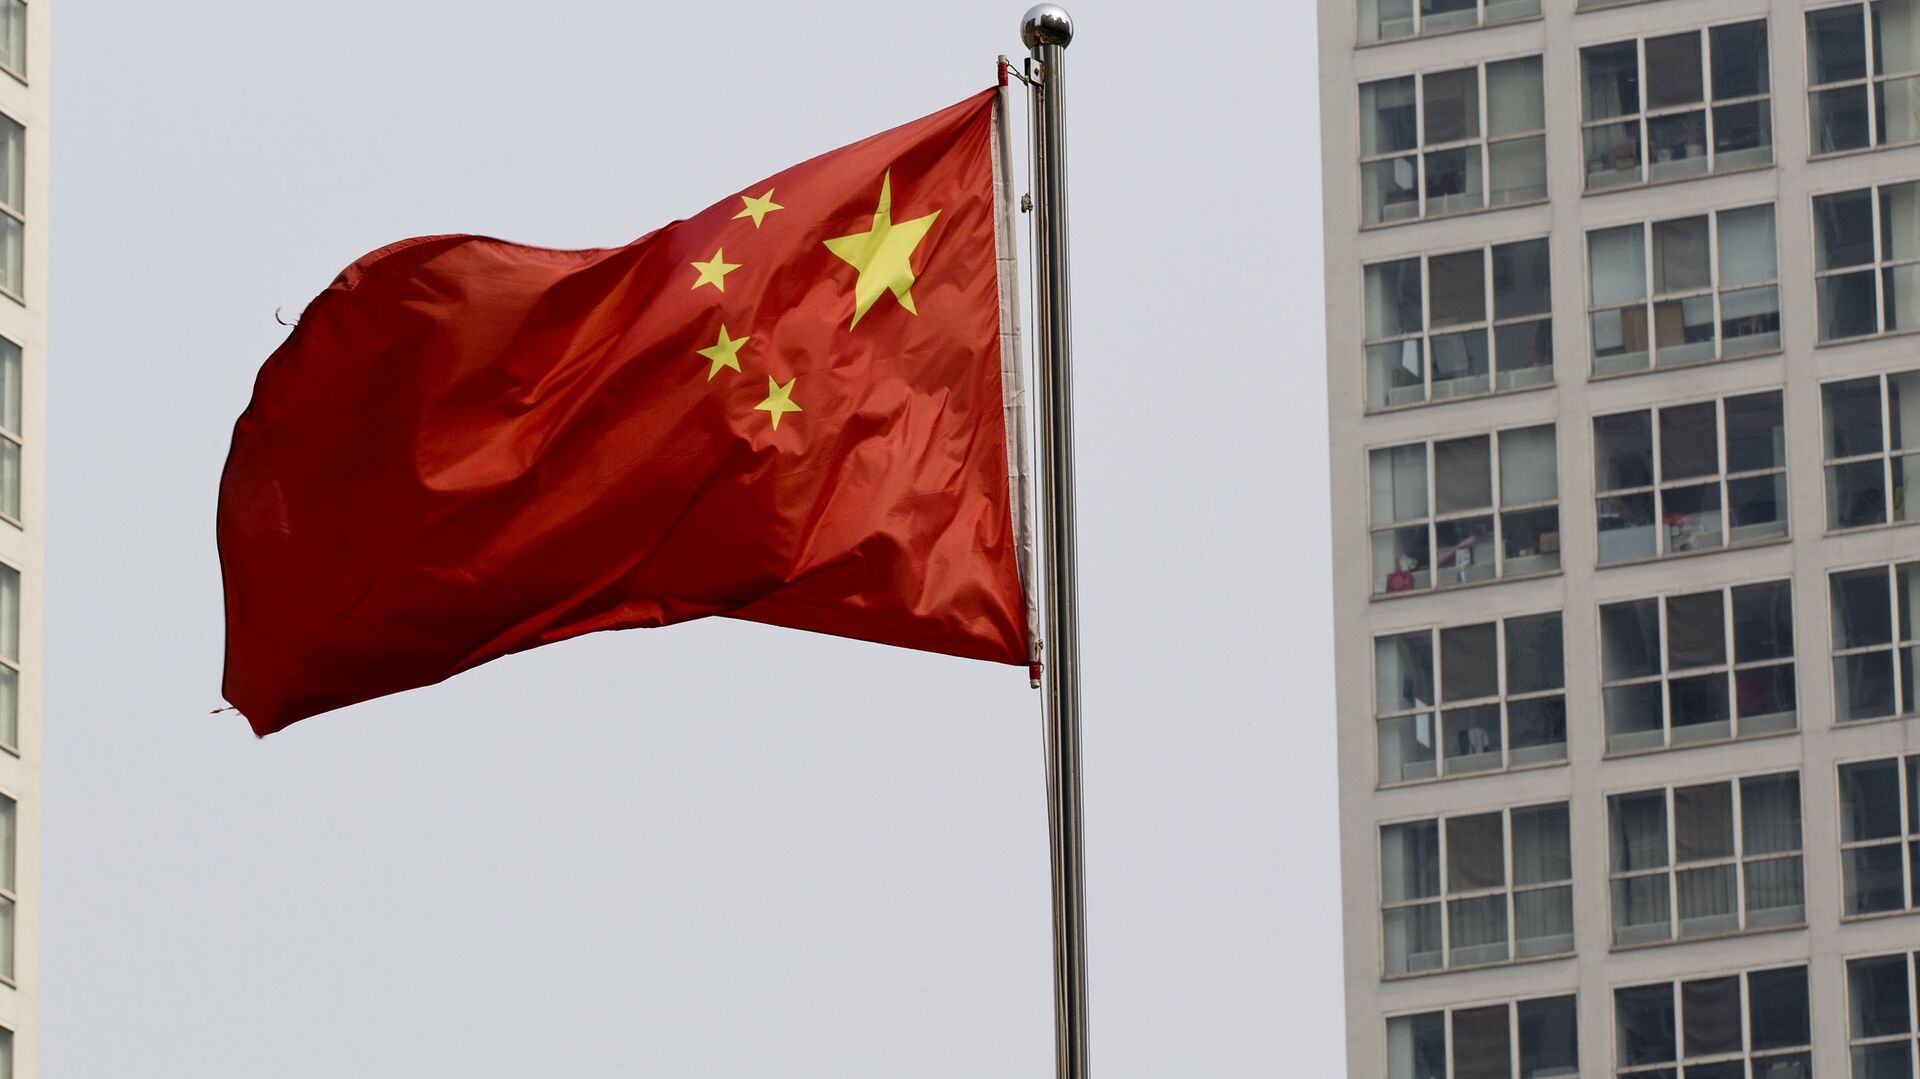 A Chinese national flag flutters in the wind in between a high-rise residential and office complex in Beijing, China. (File) - Sputnik Moldova-România, 1920, 09.04.2022